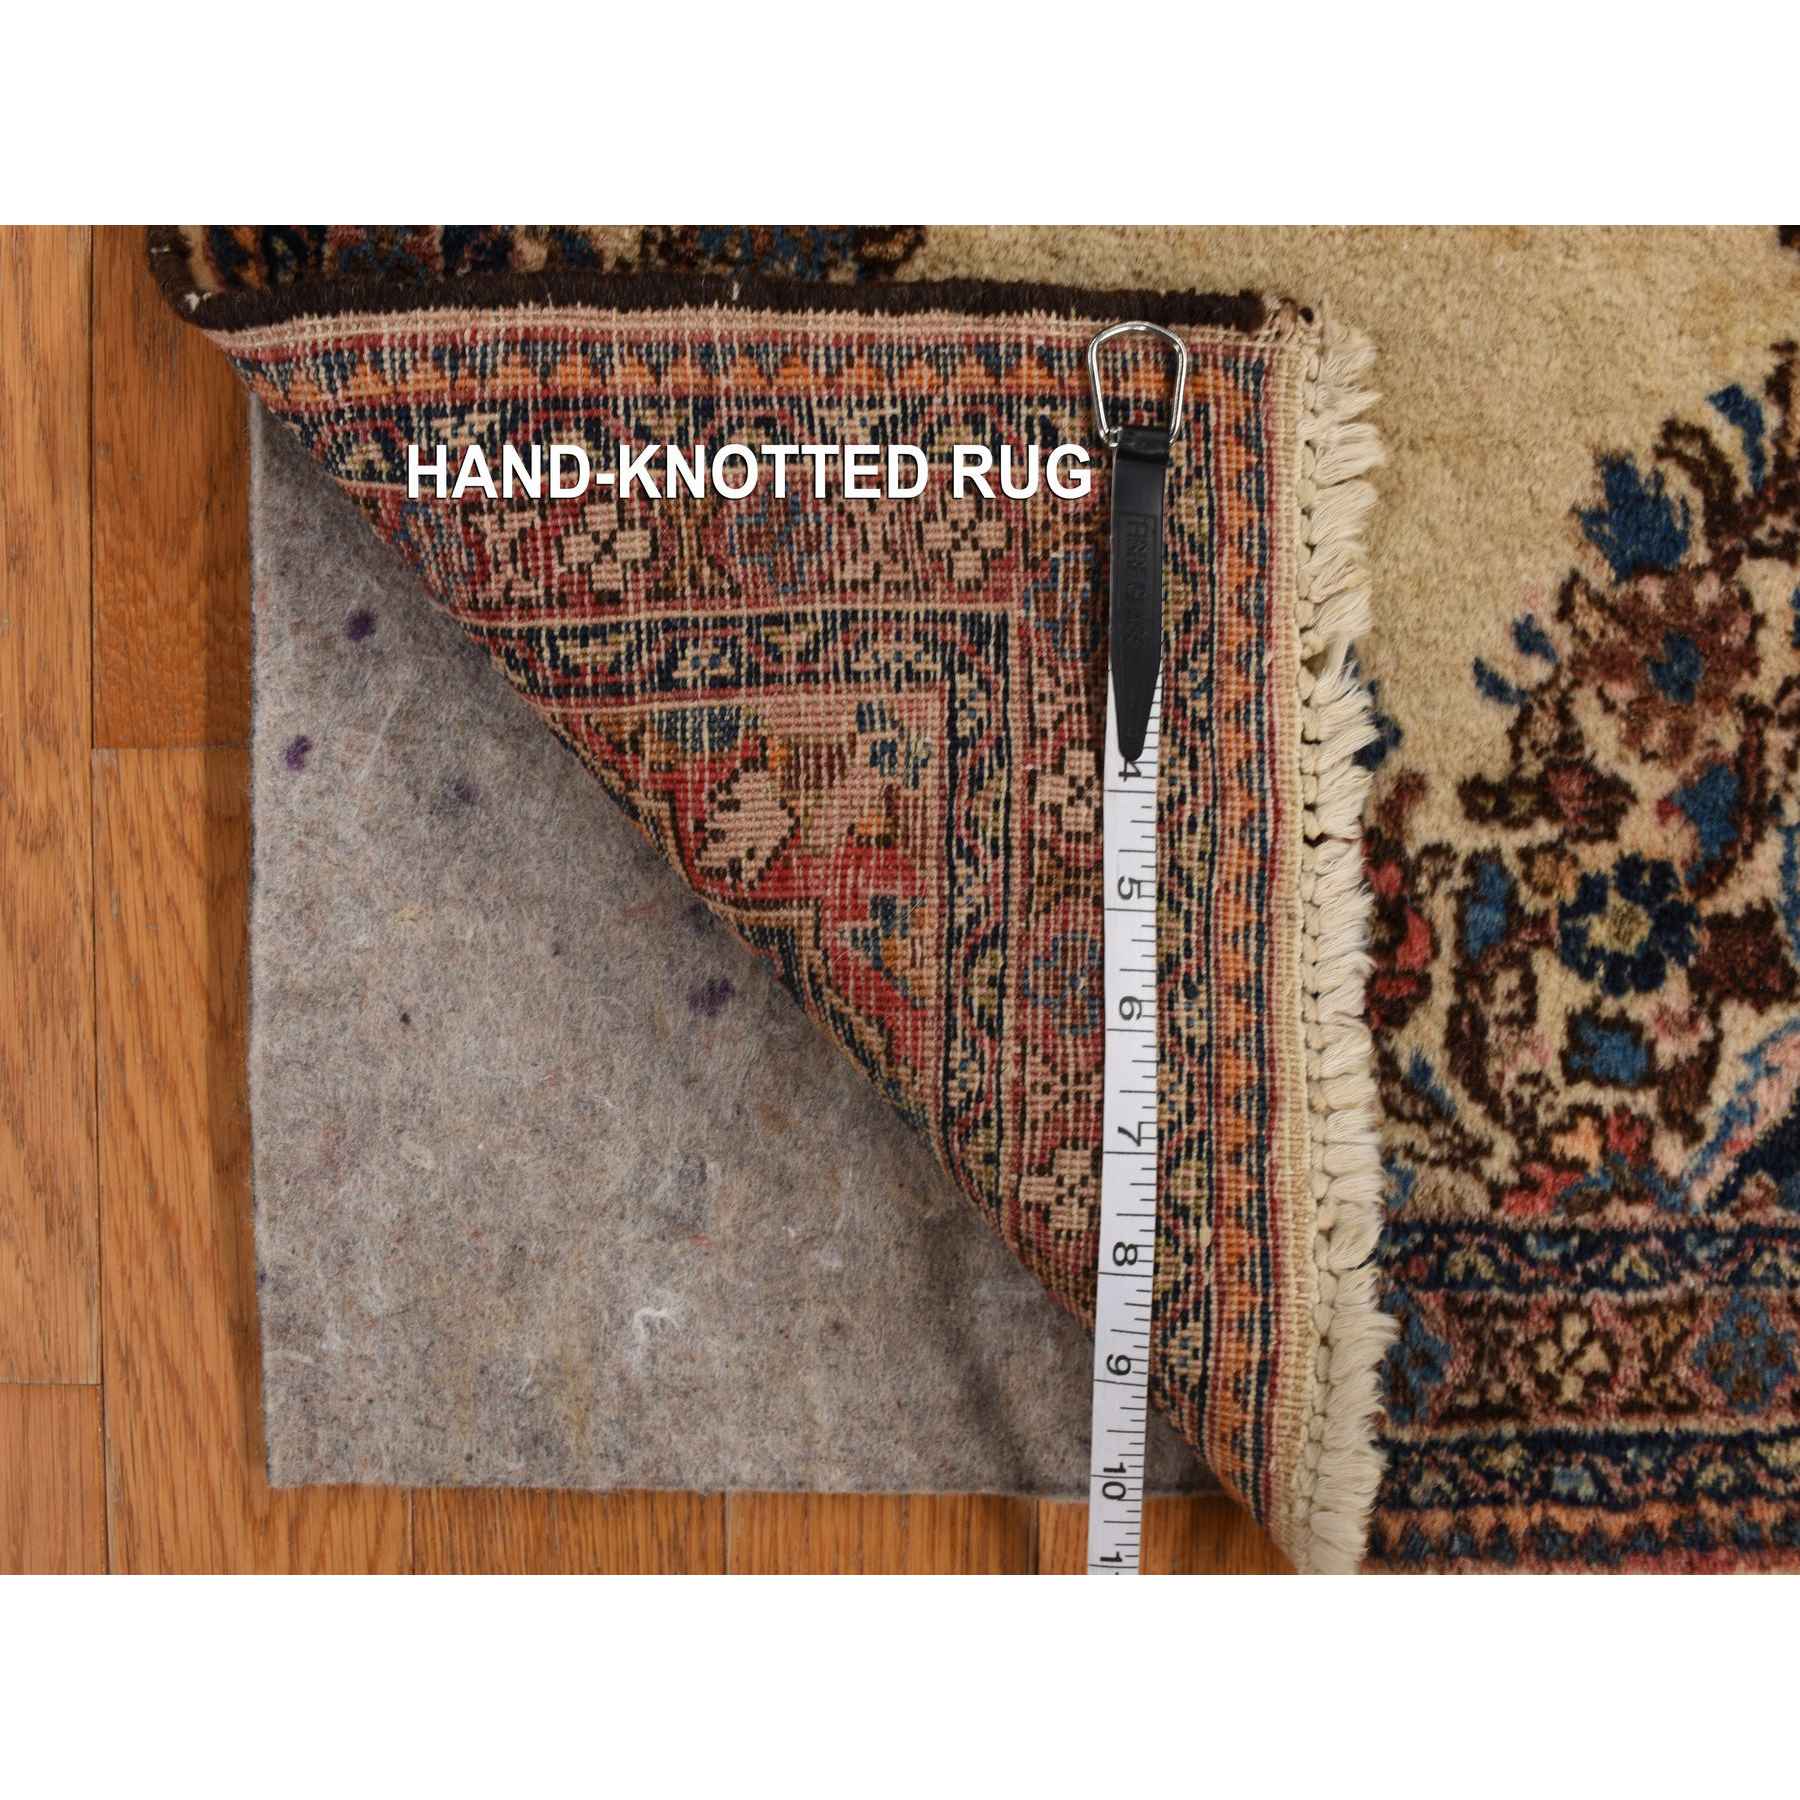 Antique-Hand-Knotted-Rug-390965